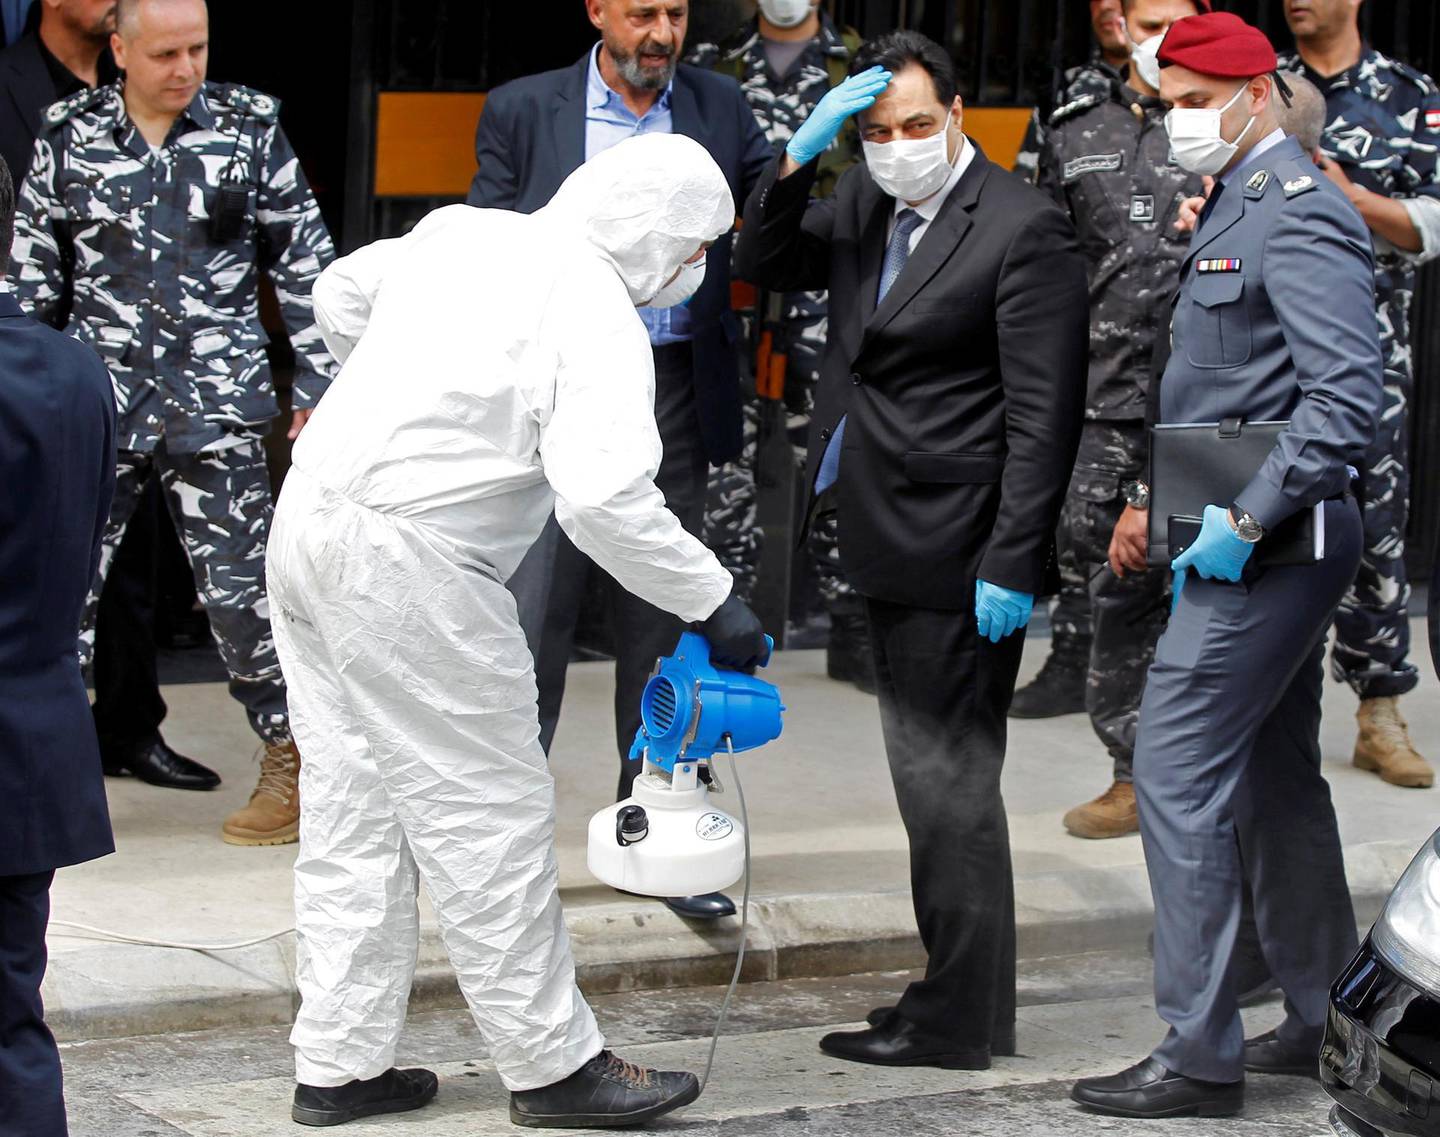 FILE PHOTO: Lebanese Prime Minister Hassan Diab is sprayed with disinfectant as he arrives to attend a legislative session in a theatre hall to allow social distancing amid spread of the coronavirus disease (COVID-19), in the UNESCO Palace building in Beirut, Lebanon April 21, 2020. REUTERS/Mohamed Azakir/File Photo